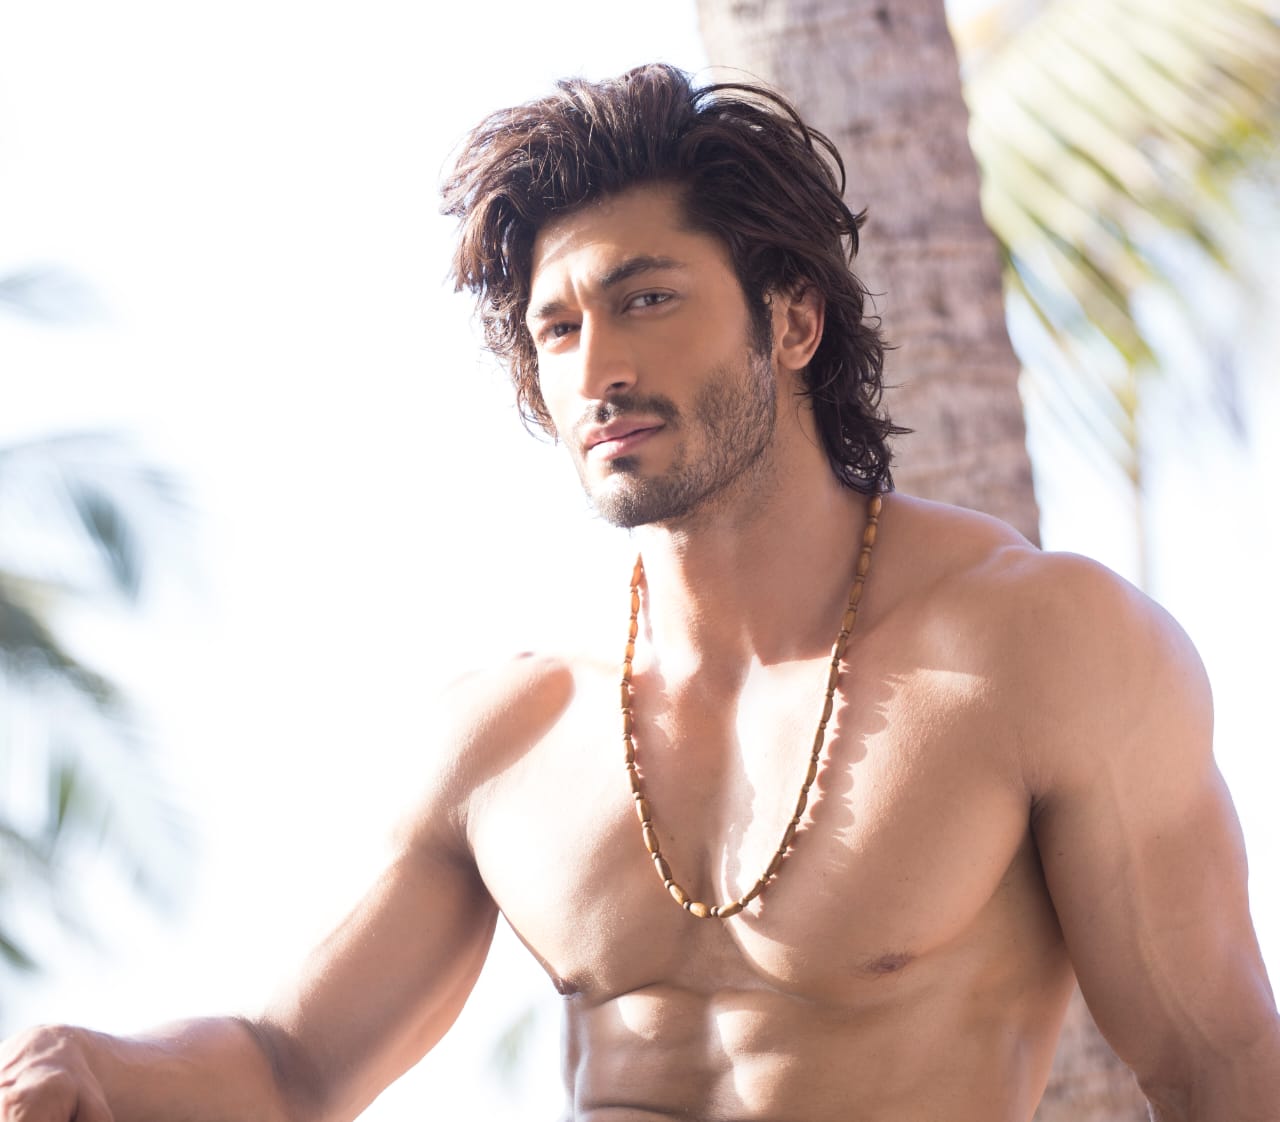 Vidyut Jamwal's Chiseled 8-Pack Abs Will Make You Want To Hit The Gym -  Fitness 